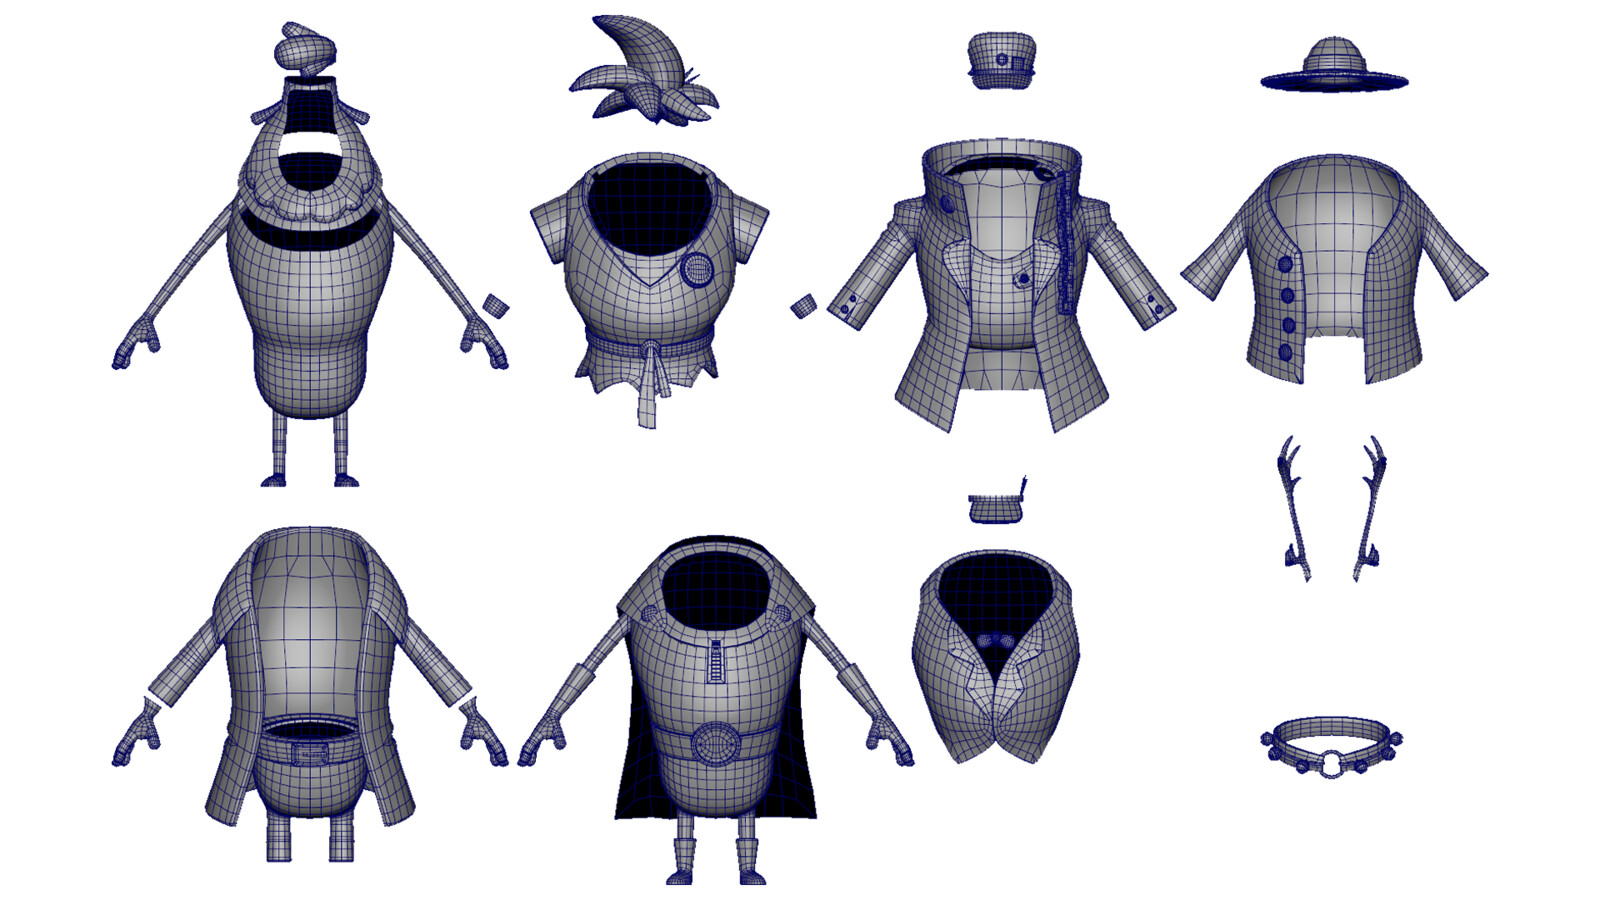 Breeh's outfits are split into body meshes and hats. There's less variations than my older models, but since we had concept art produced the outfits are more curated. 